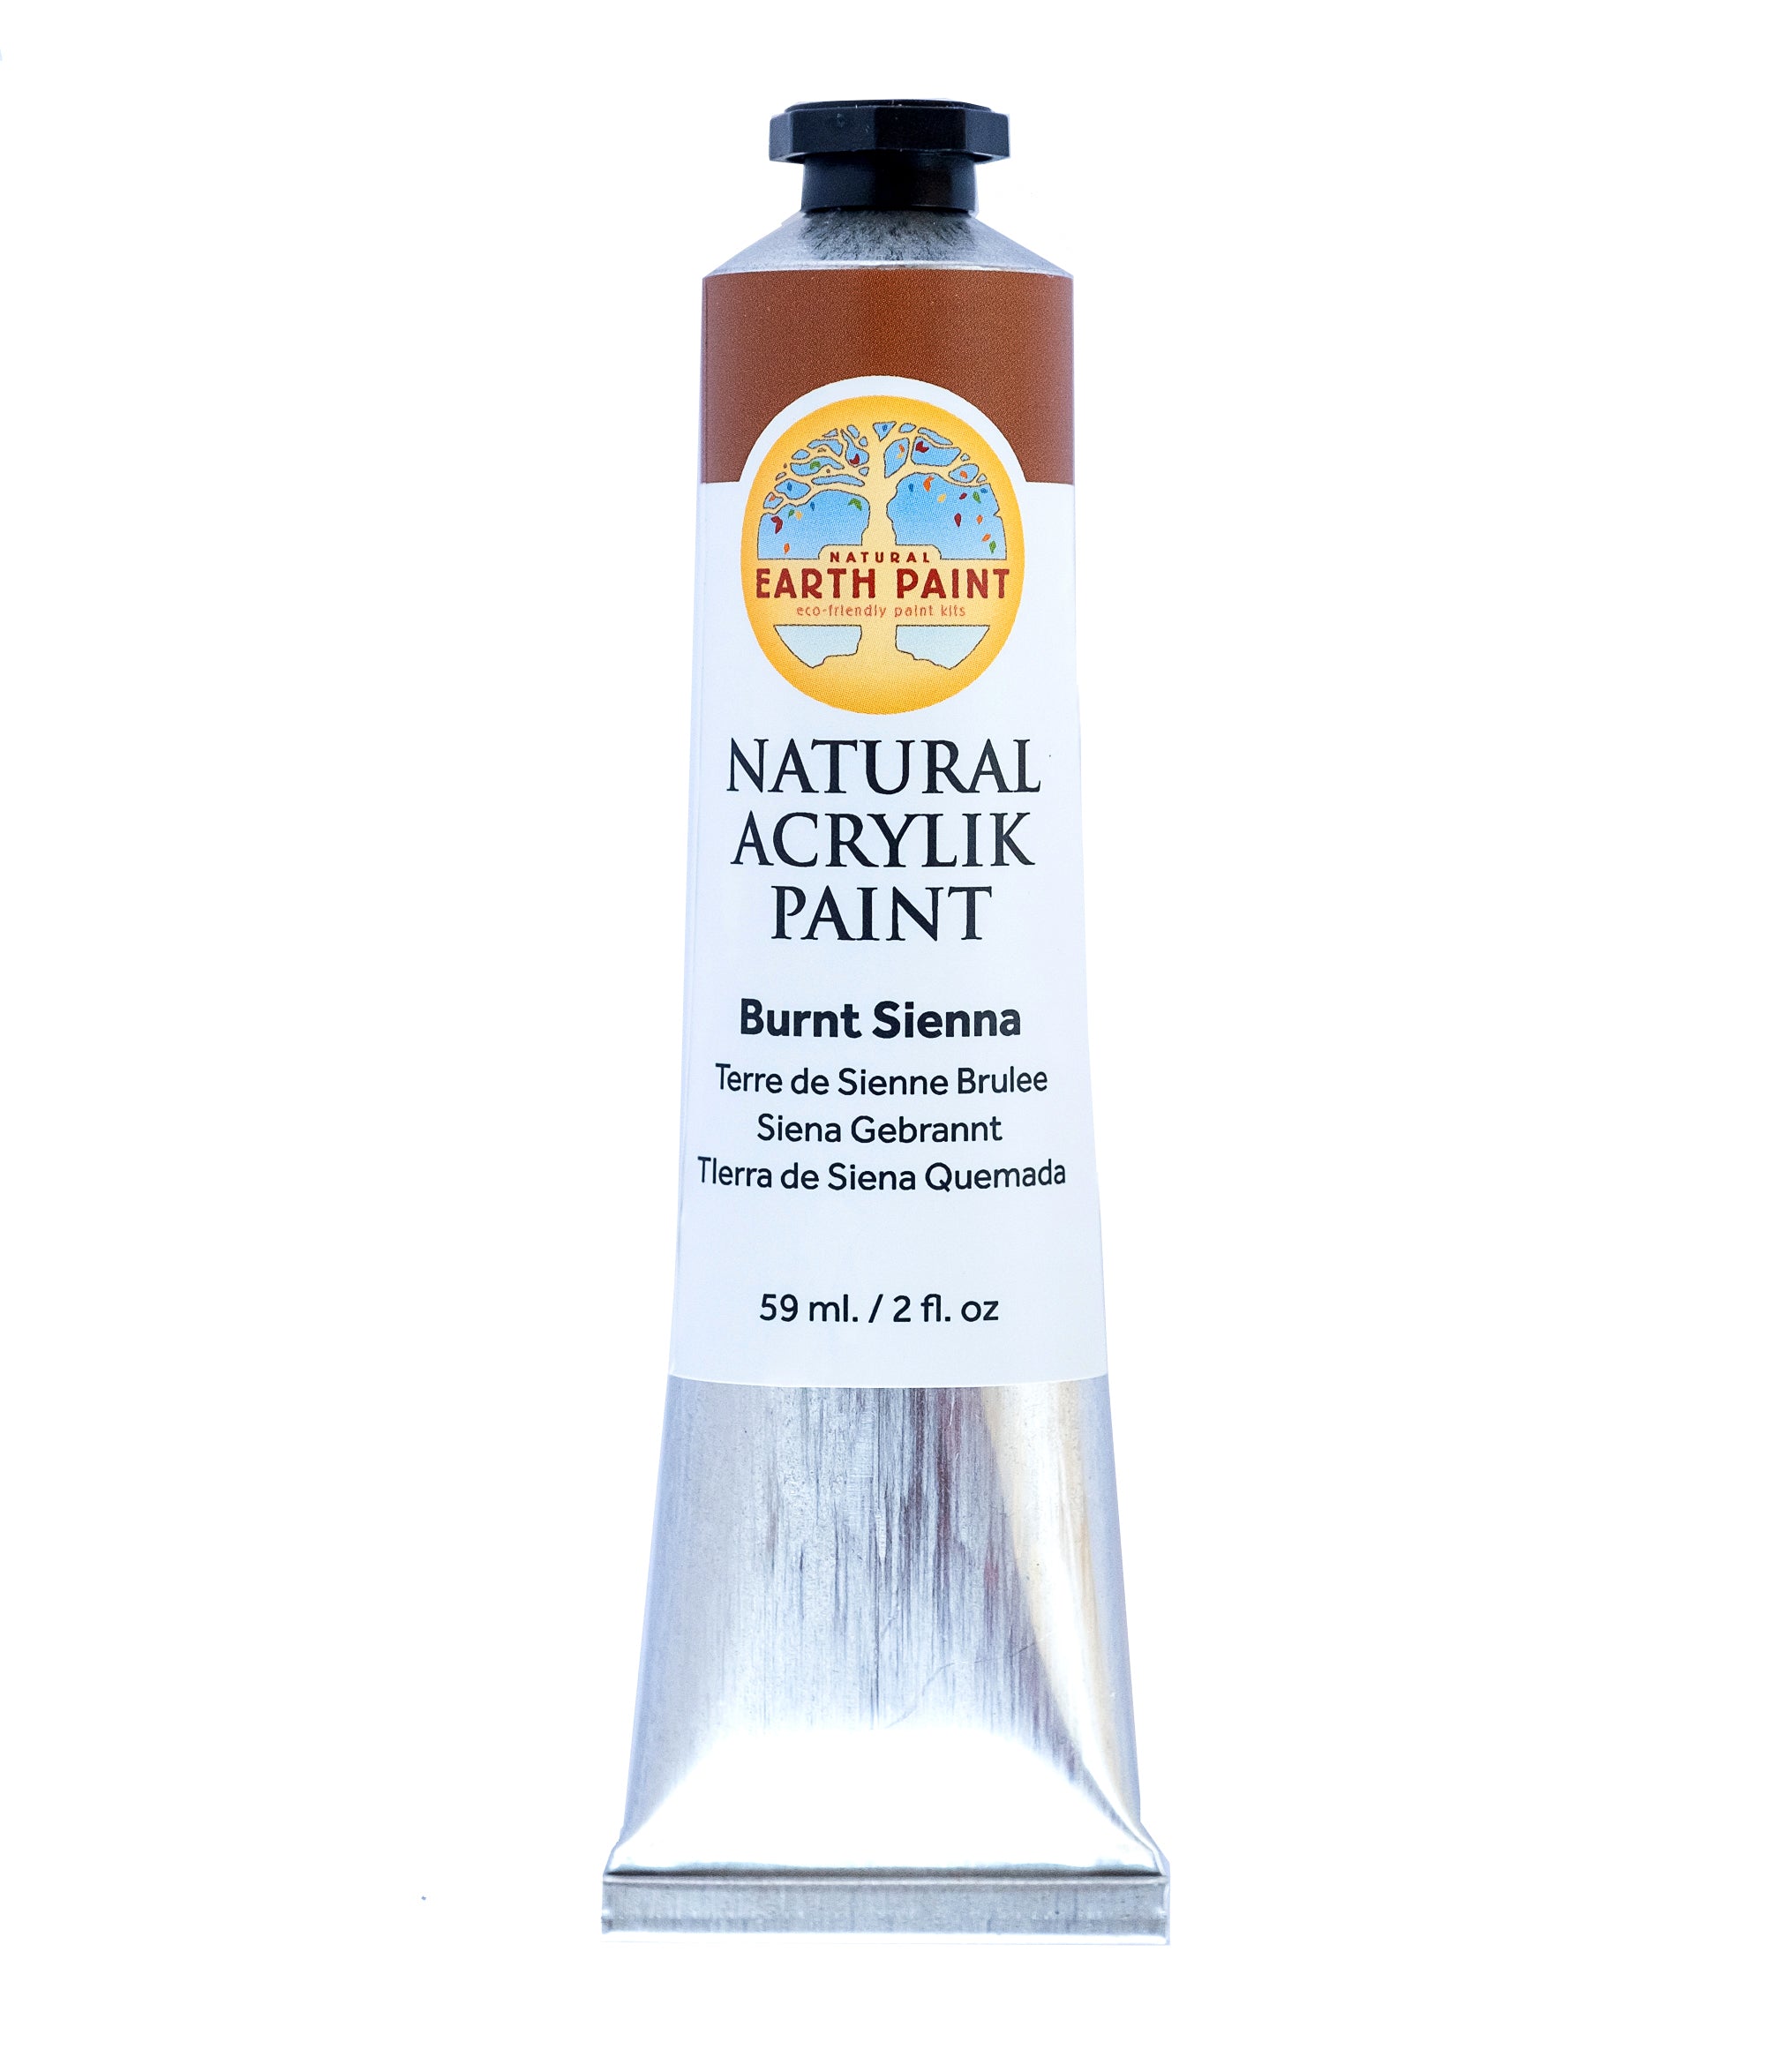 Natural Acrylik Paint™ - Individual Tubes-acrylic, acrylic paint, art, arts and craft, colors from the earth, earth colors, earth paint, earth pigments, eco art supplies, Eco Artist Paints, eco friendly paints, eco-friendly art supplies, eco-friendly paint, Fine Art Supplies Products, natural acrylic, natural artist paints, natural earth colors, natural paint, natural paints, non-toxic paint, nontoxic artist paints, nontoxic artist supplies, nontoxic paints, paint, sustainable art supplies-Burnt Sienna-Natu